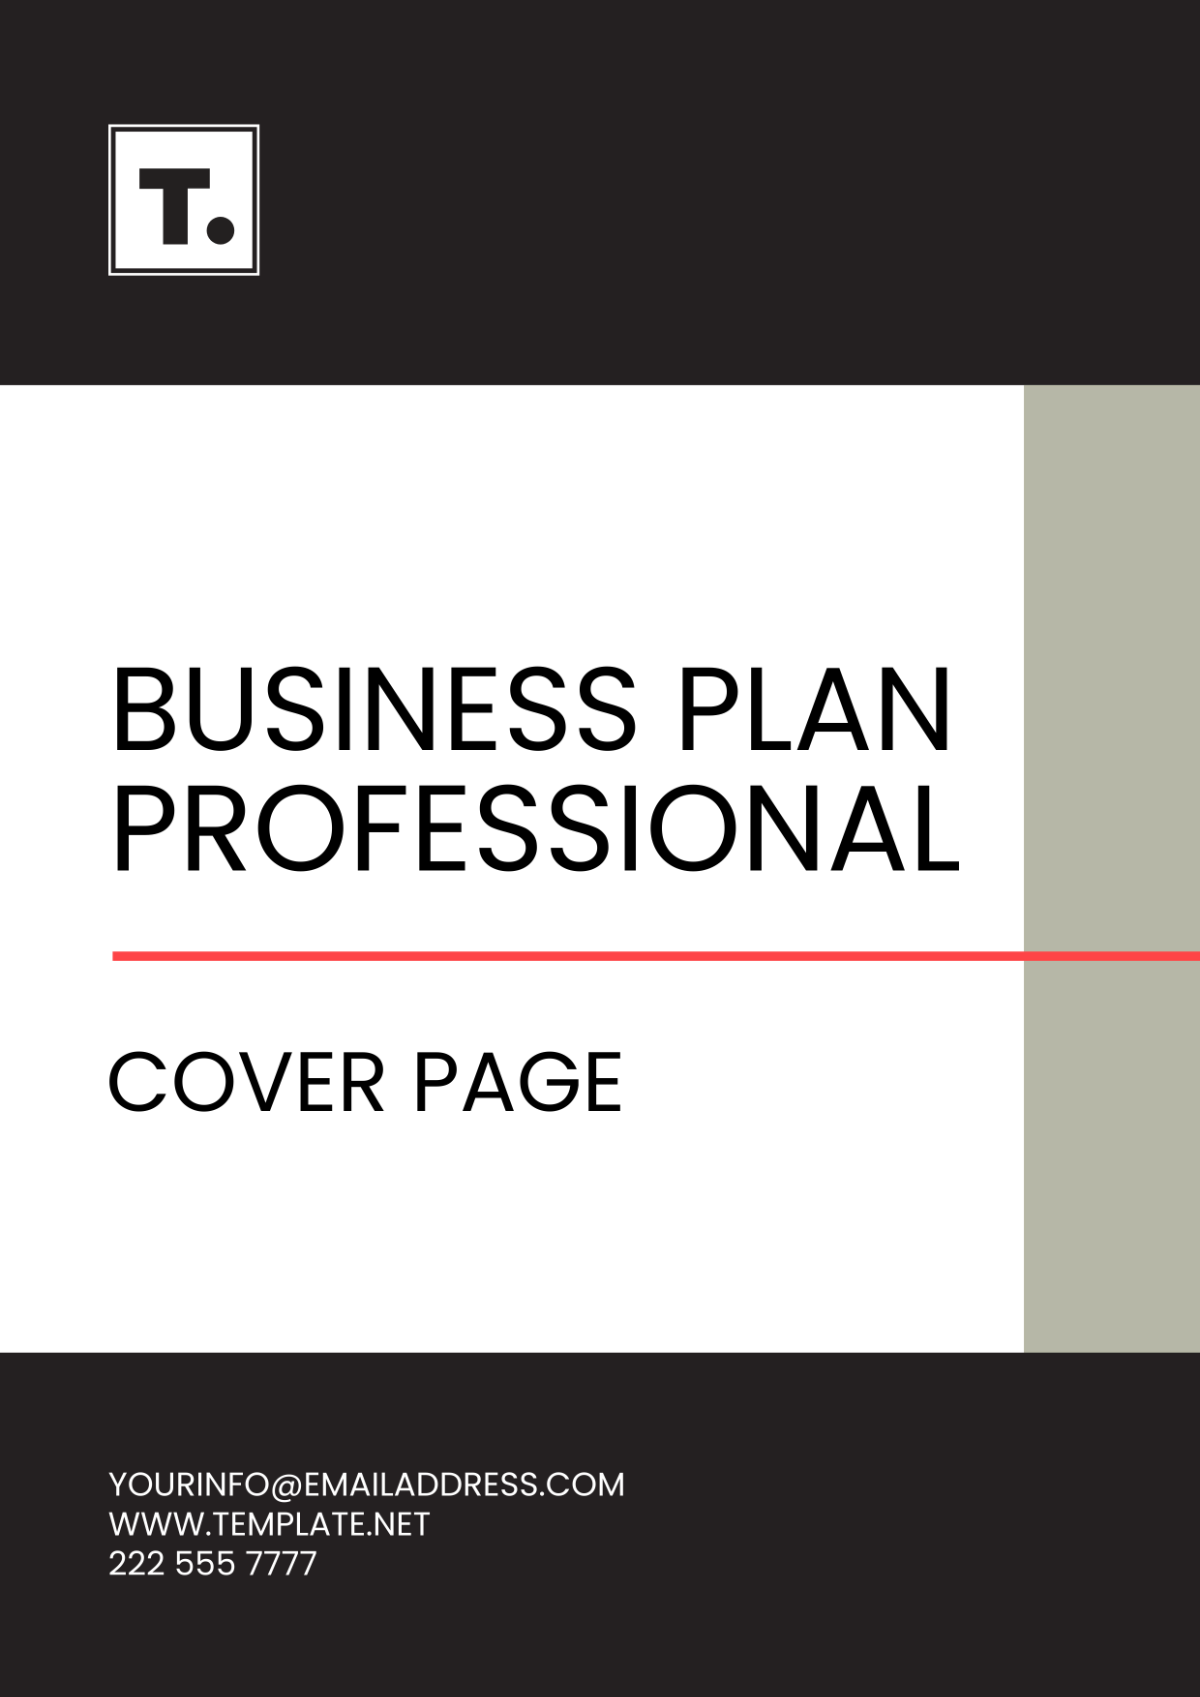 Business Plan Professional Cover Page Template